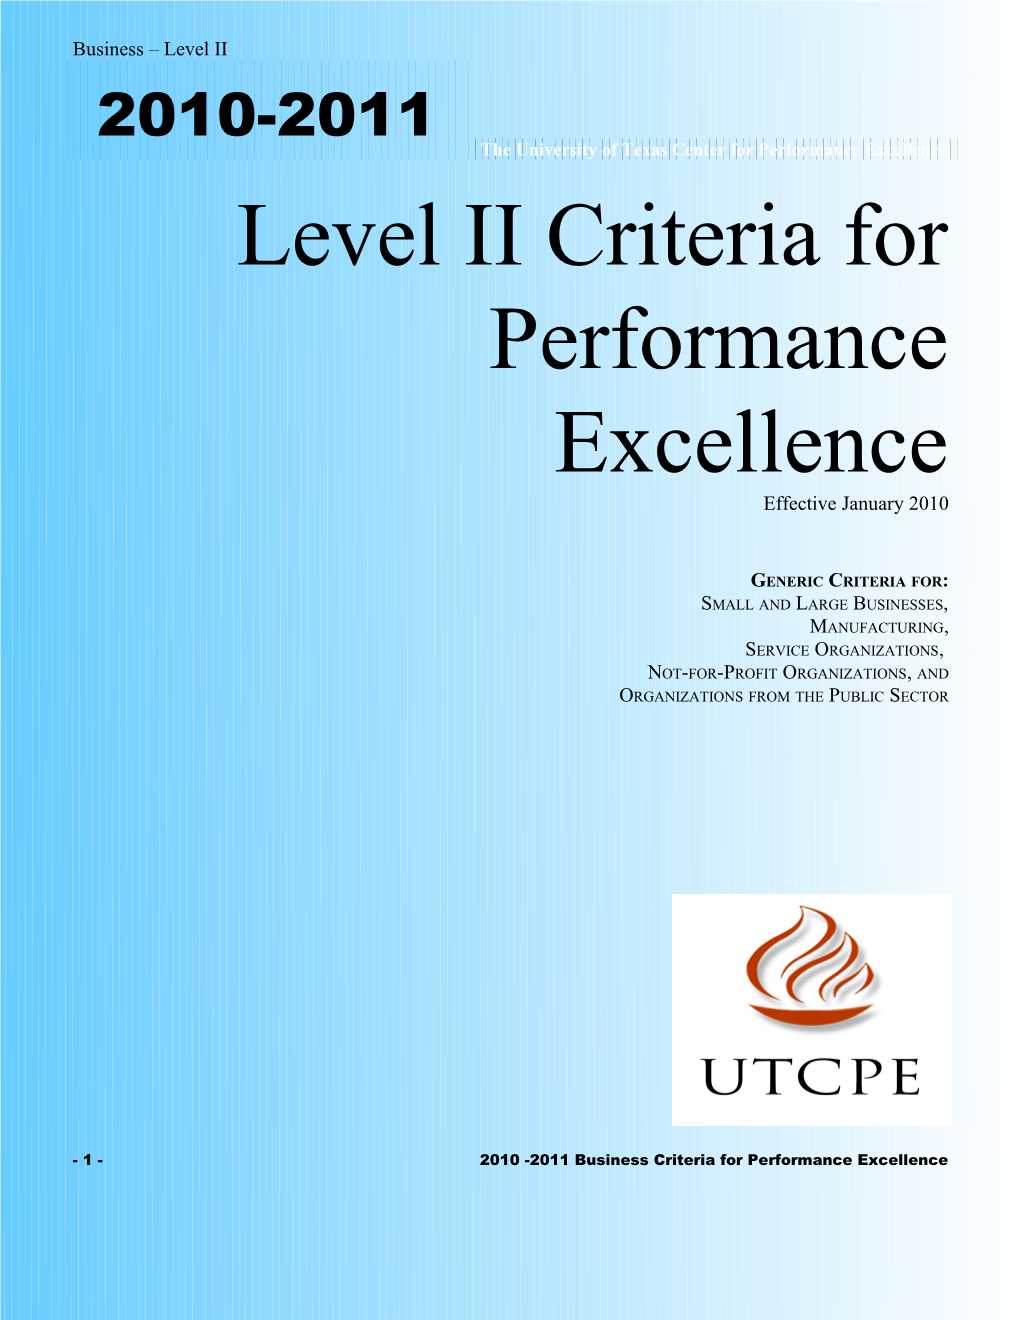 Business Engagement, Commitment, and Progress Level Criteria for Performance Excellence